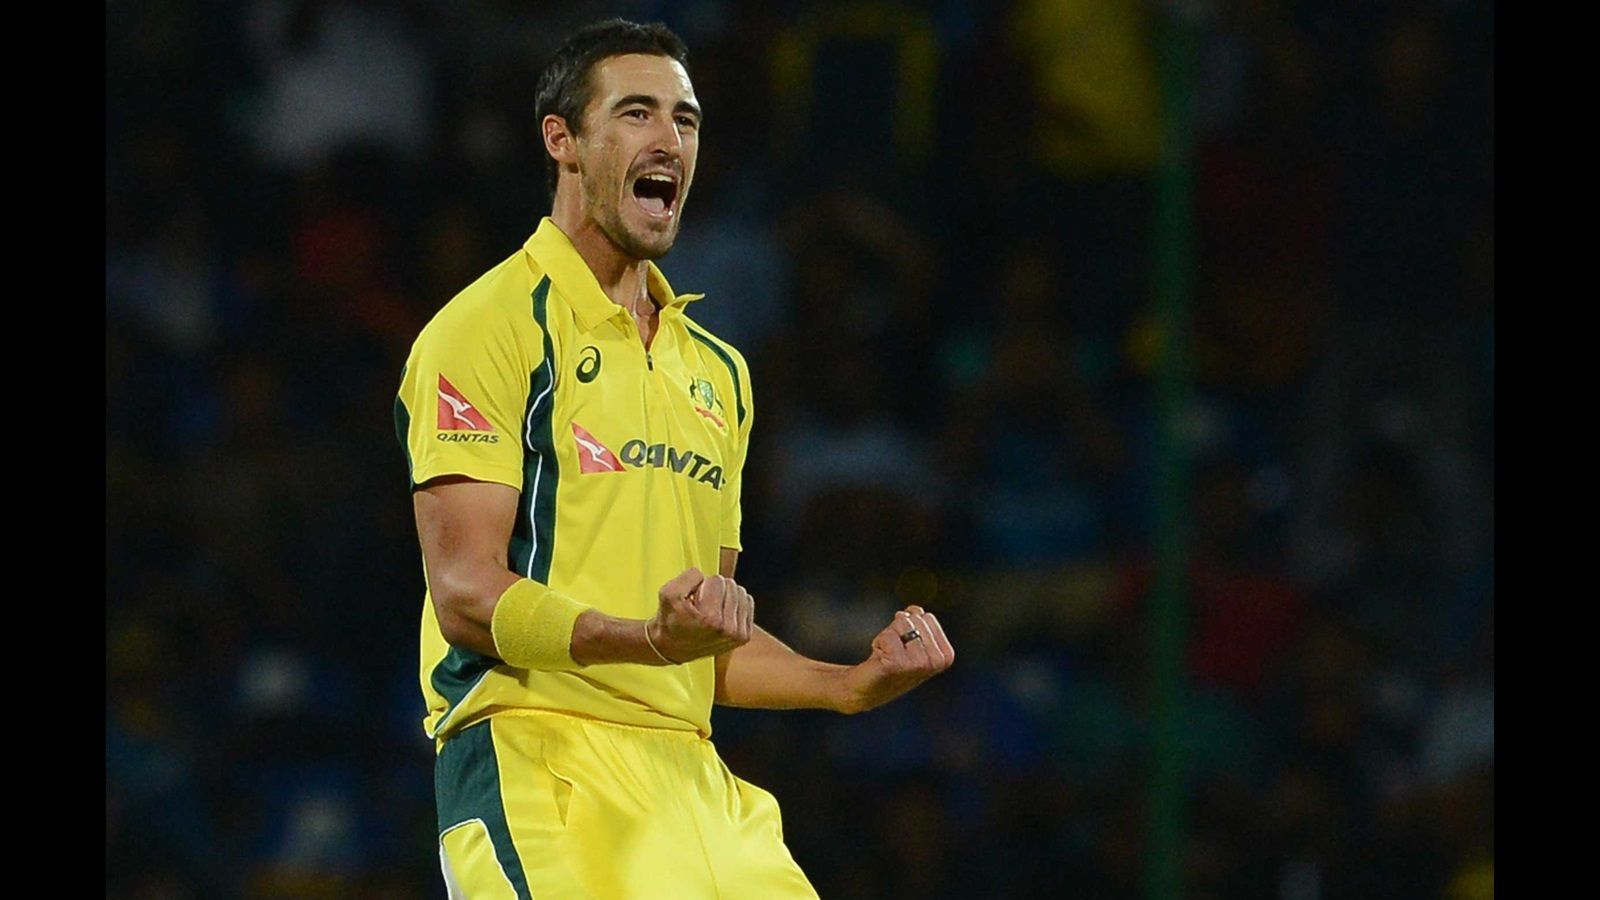 Mitchell Starc suffered an injury to his finger on the very first match of the tour